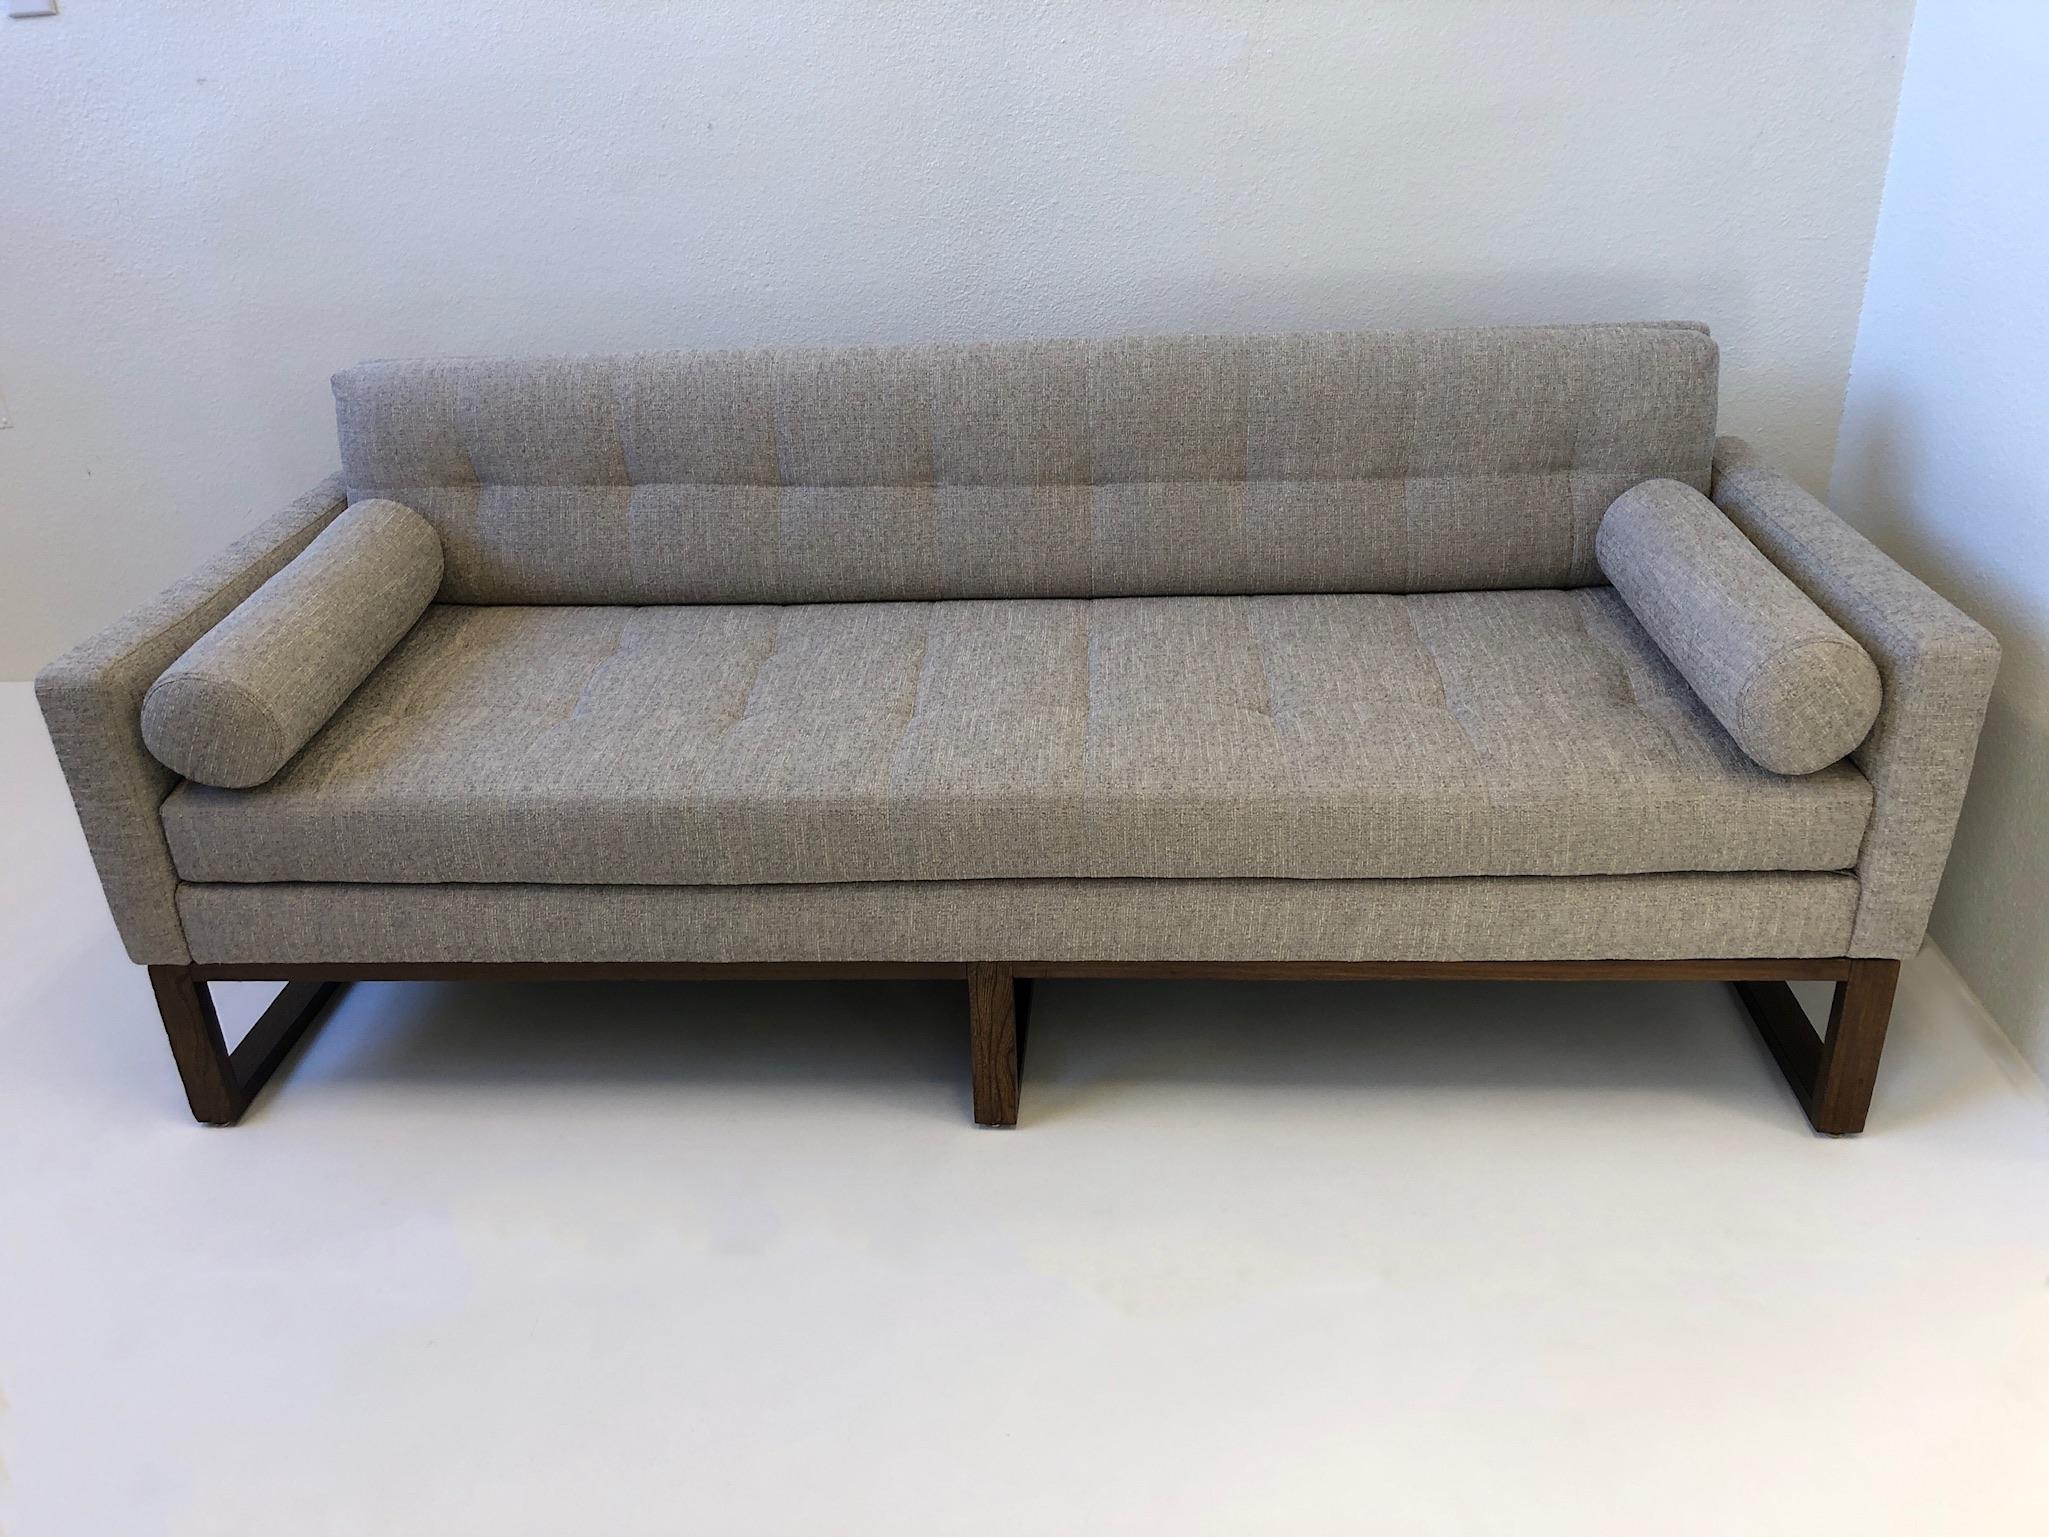 fabric sofas for sale